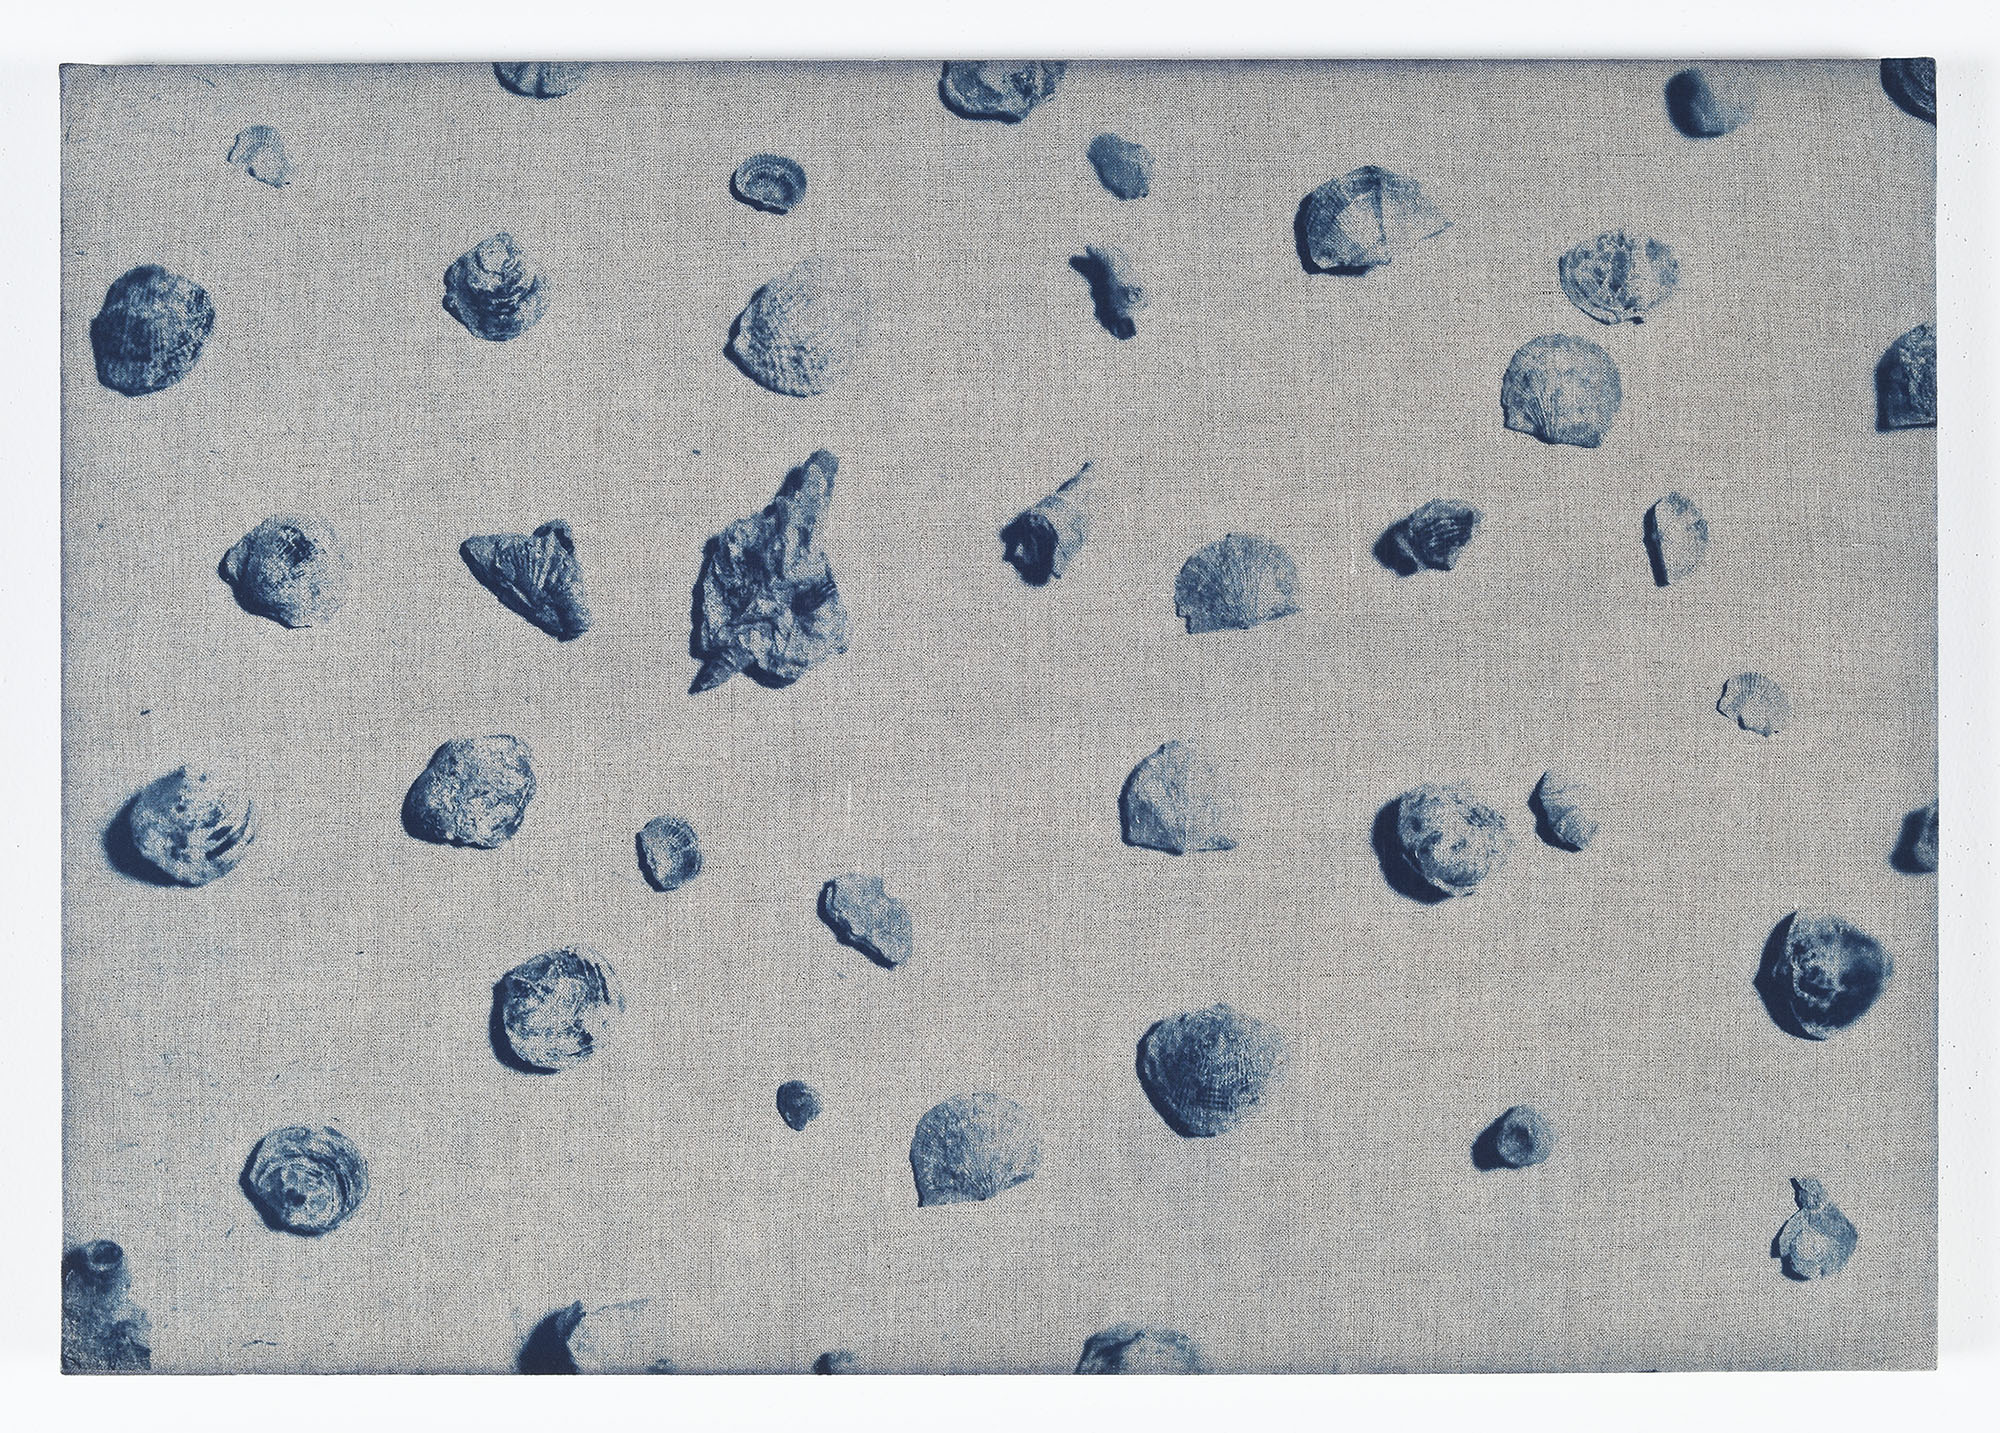 John Opera, Devonian I, 2012. Cyanotype on stretched linen. Collection of DePaul Art Museum, Art Acquisition Endowment, 2013.31